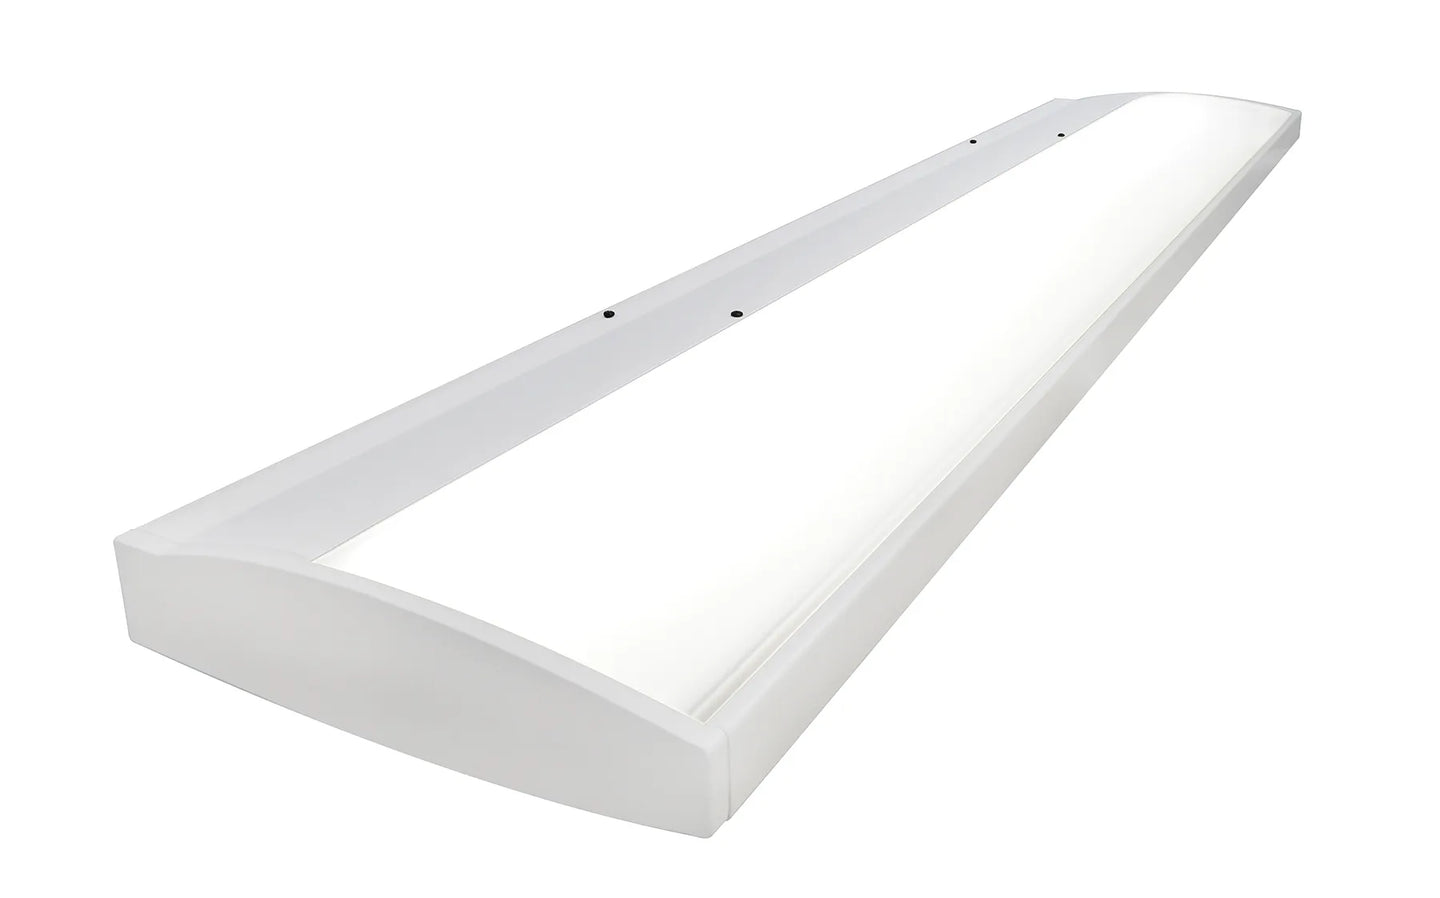 Waldmann AMA335LVD-00; AMADEA Bed Light, White, 3500K, 41 Inches, Low Voltage Dimming